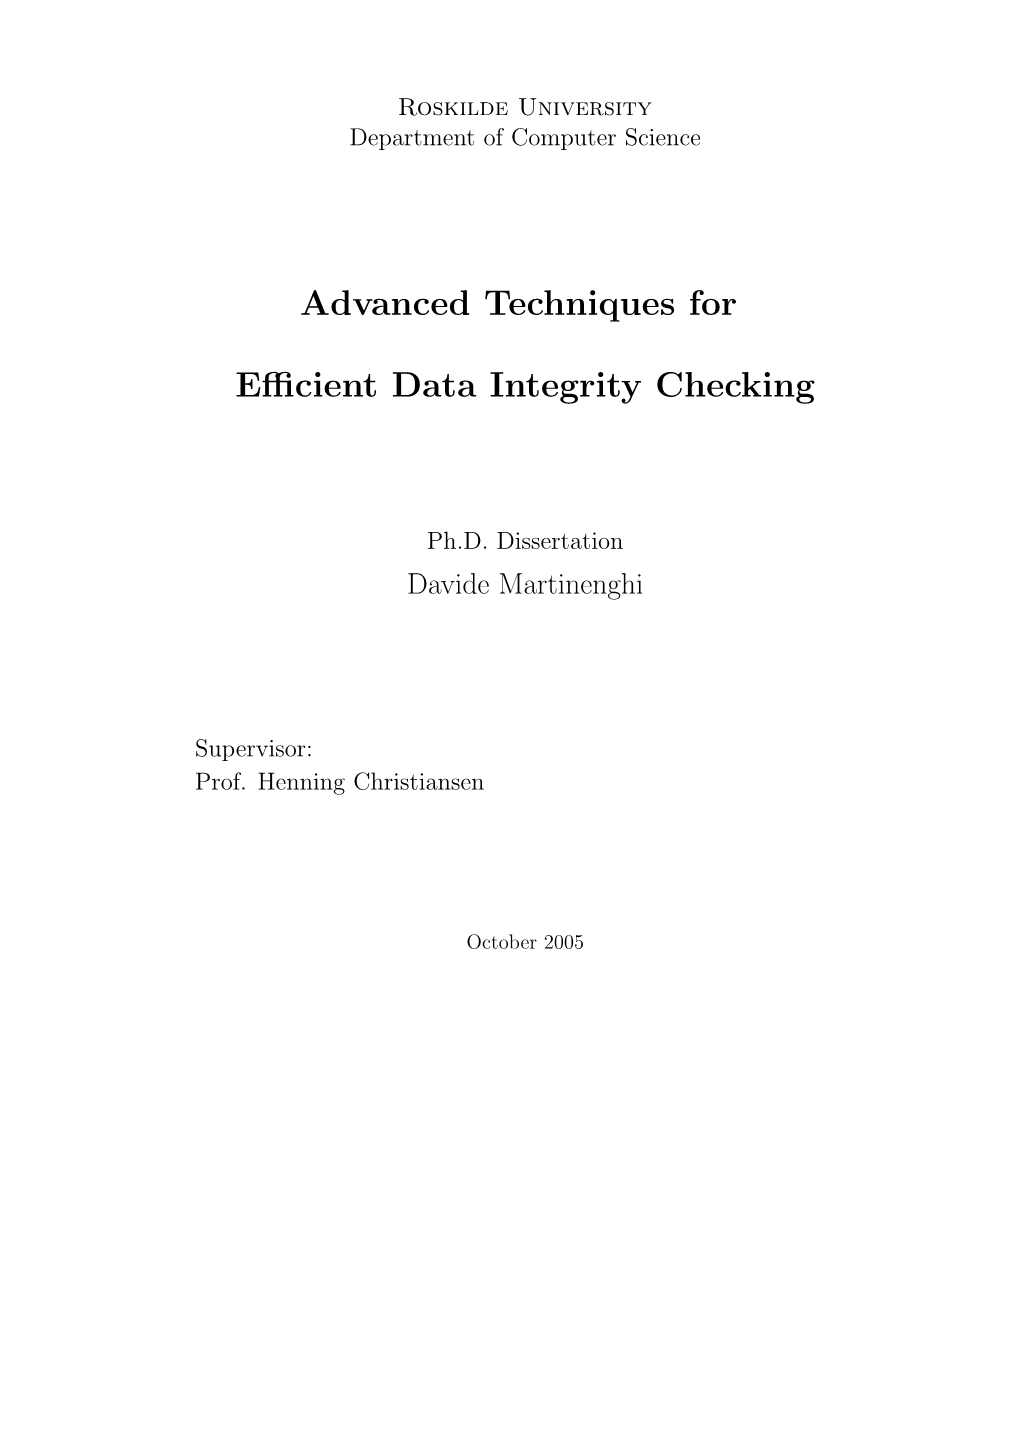 Advanced Techniques for Efficient Data Integrity Checking